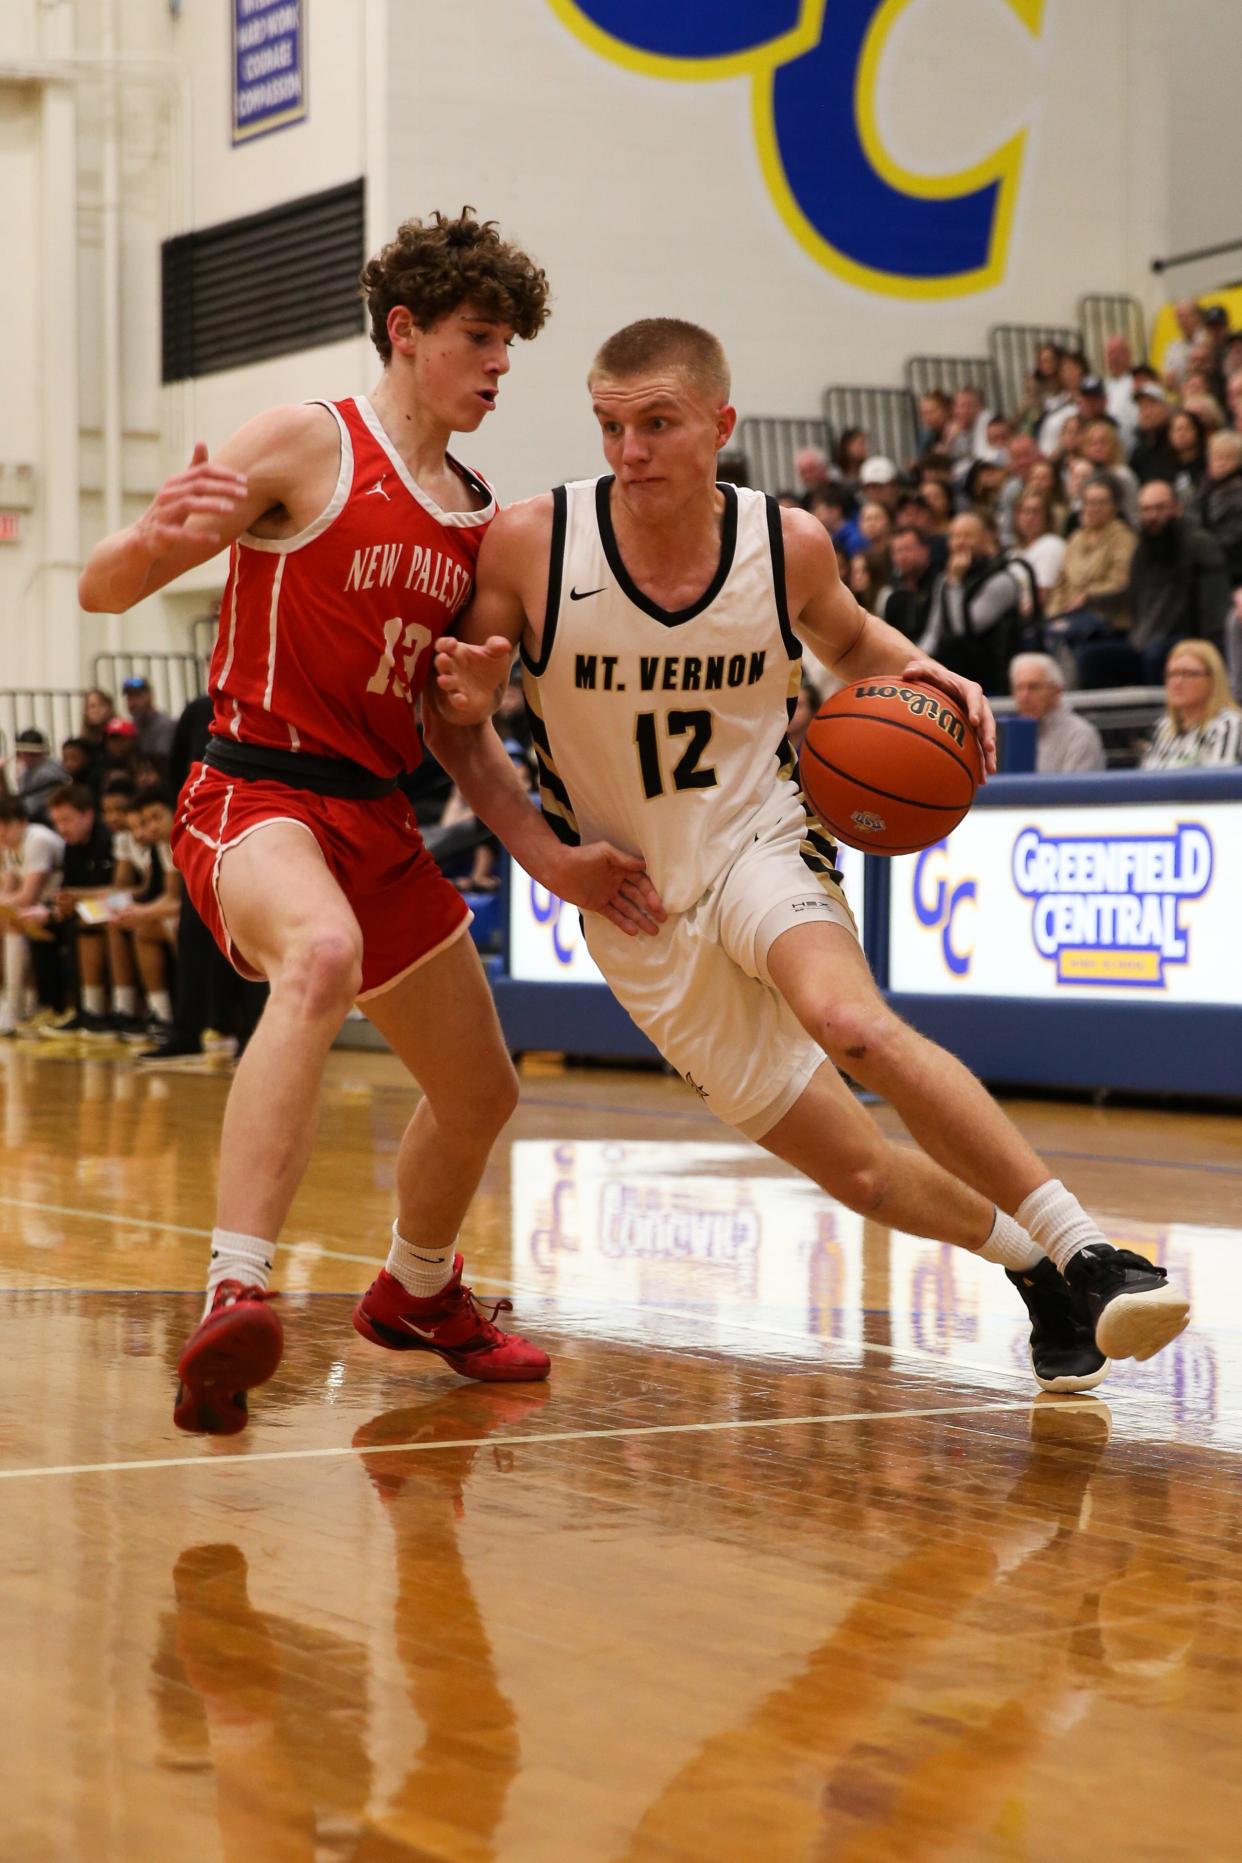 Mt. Vernon Luke Ertel (12) attempts to get around New Palestine Austin Mcmahan (13) as New Palestine plays Mt. Vernon High School in the IHSAA Class 4A Boys Basketball S9 Sectional, Feb 27, 2024; Greenfield, IN, USA; at Greenfield-Central High School.